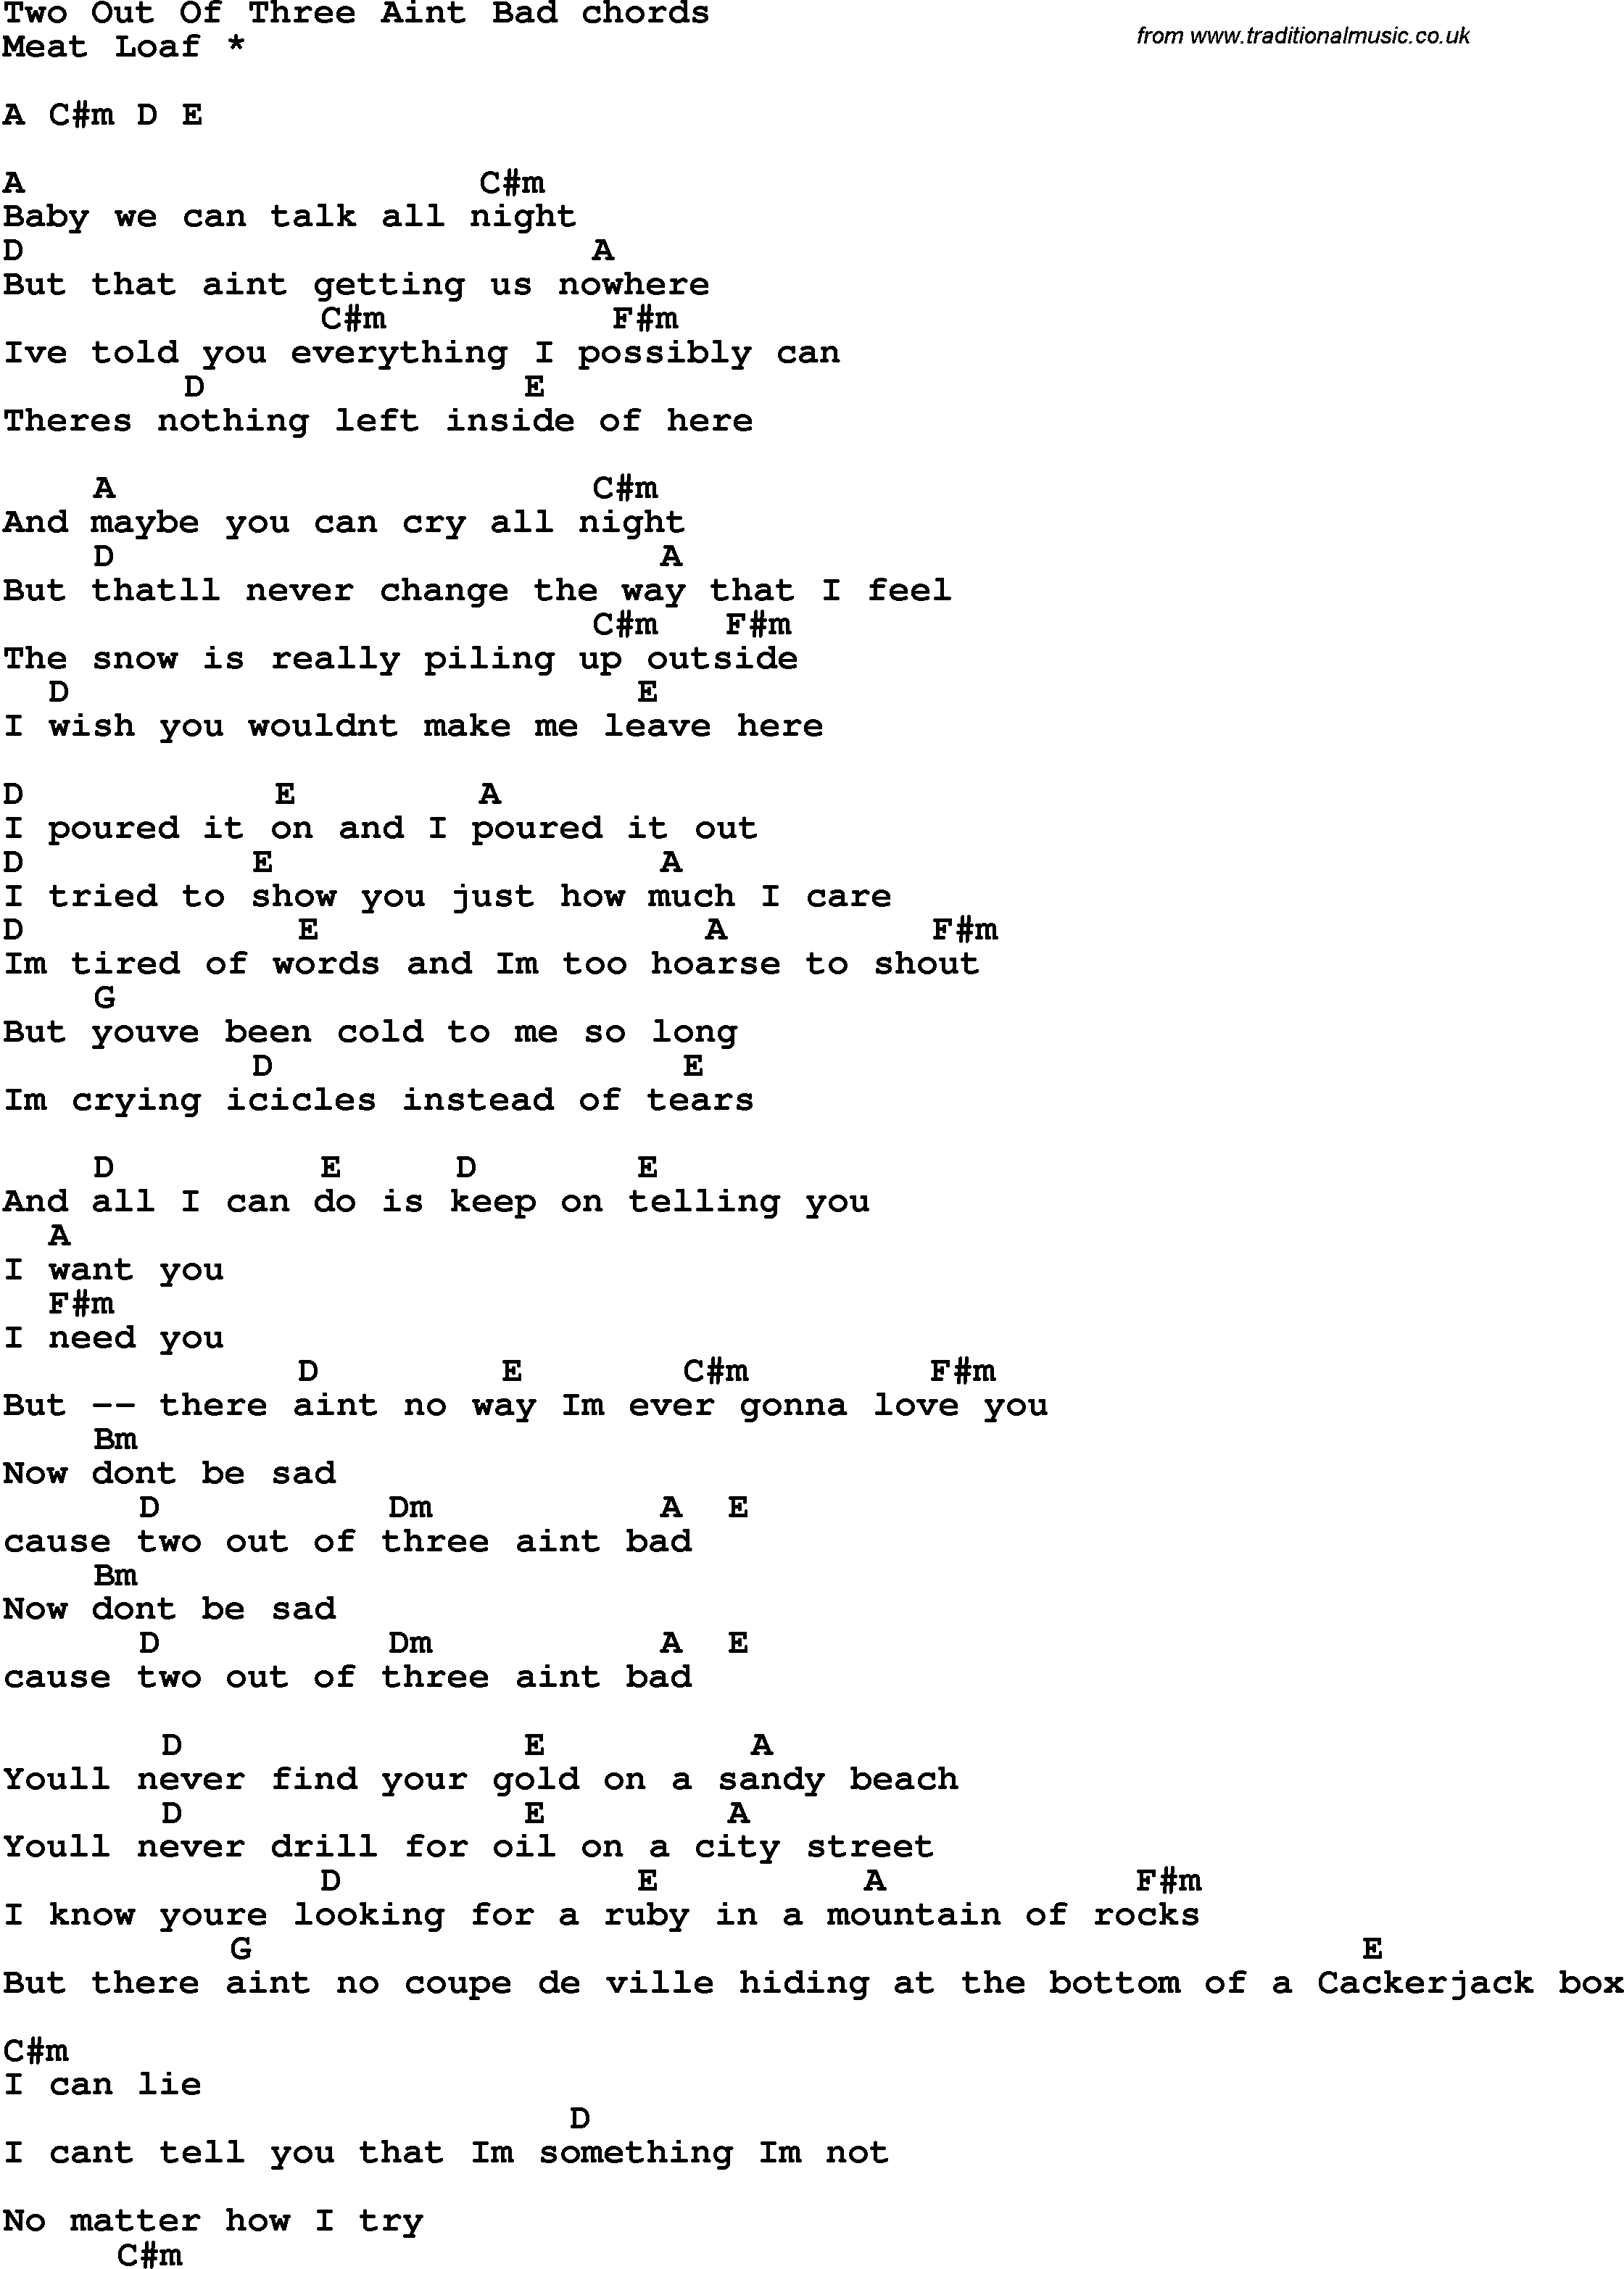 Song Lyrics with guitar chords for Two Out Of Three Ain't Bad